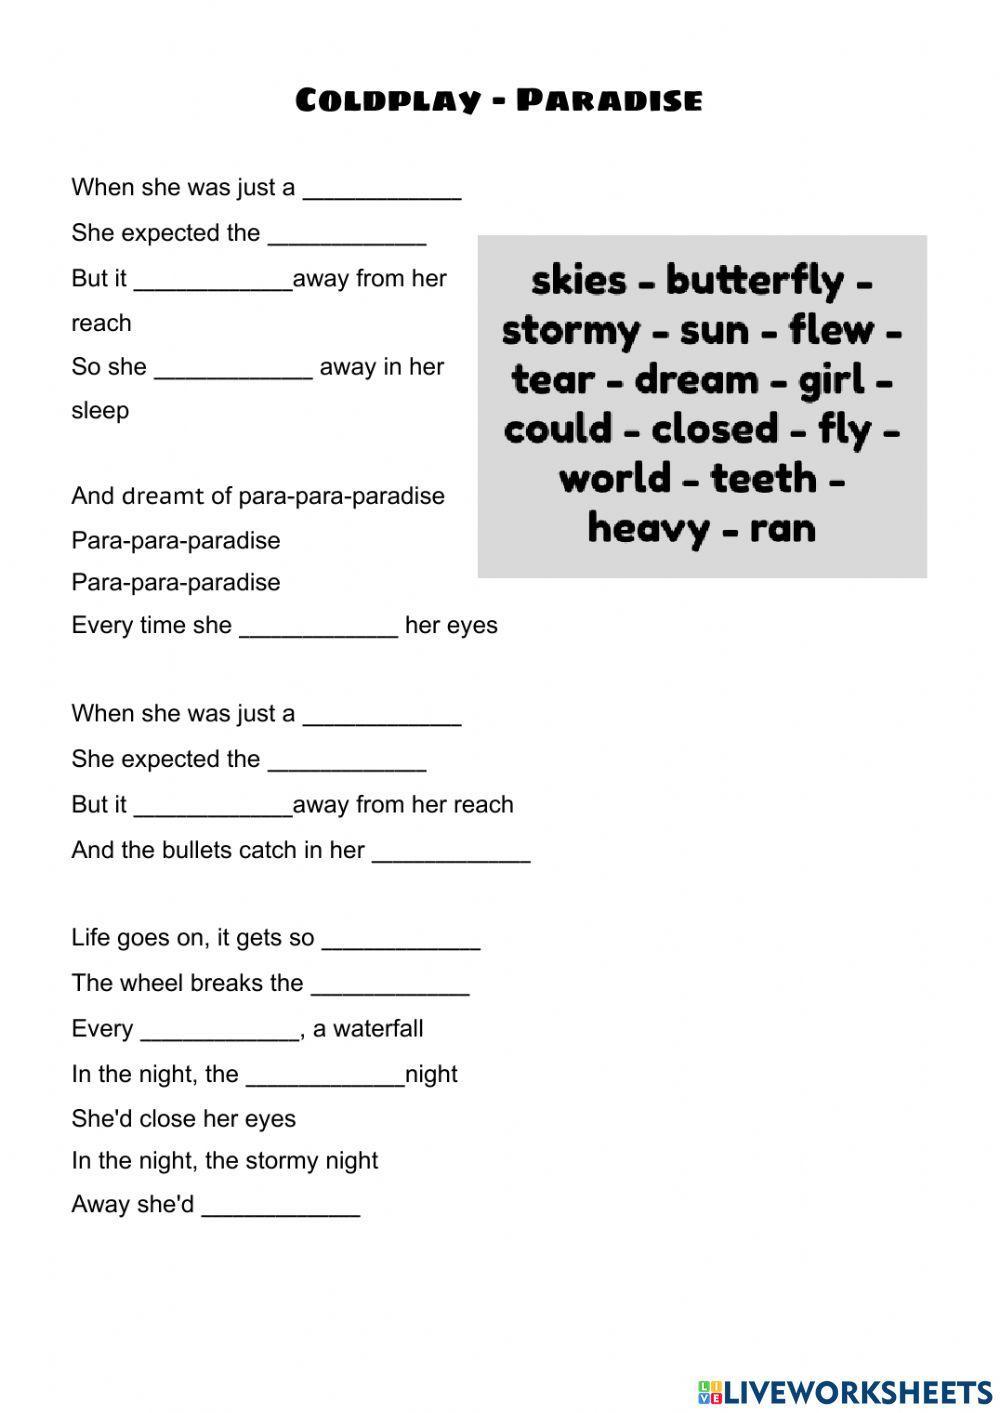 Paradise - Coldplay song and nursery…: English ESL worksheets pdf